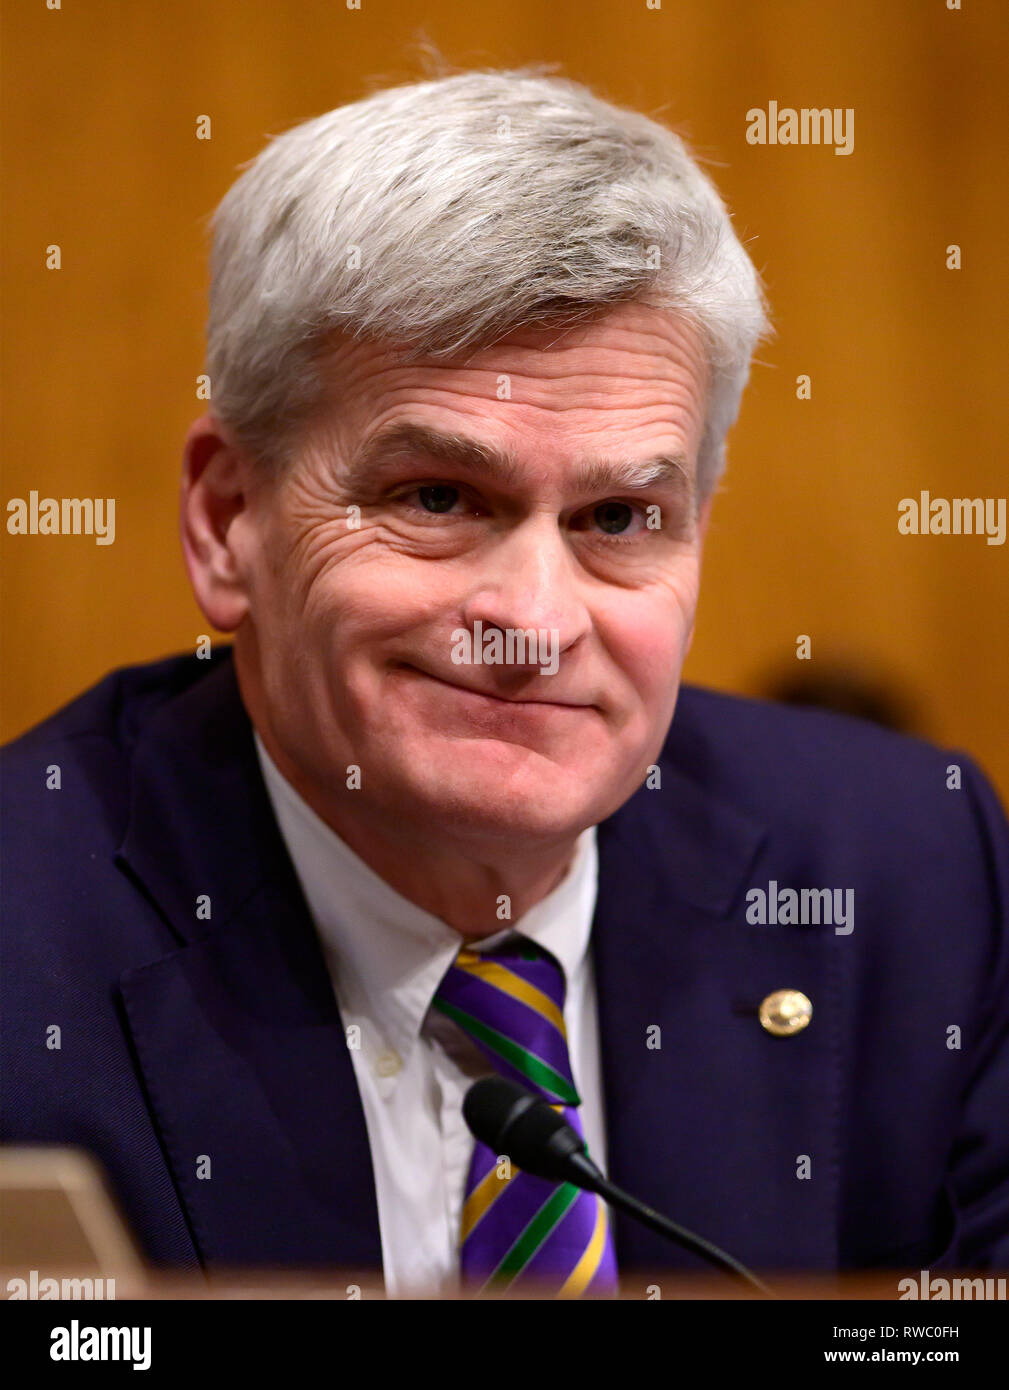 Washington, United States Of America. 05th Mar, 2019. United States Senator Bill Cassidy (Republican of Louisiana) presides during the United States Senate Committee on Health, Education, Labor and Pensions Committee hearing on 'Vaccines Save Lives: What Is Driving Preventable Disease Outbreaks?' on Capitol Hill in Washington, DC on Tuesday, March 5, 2018. Credit: Ron Sachs/CNP | usage worldwide Credit: dpa/Alamy Live News Stock Photo